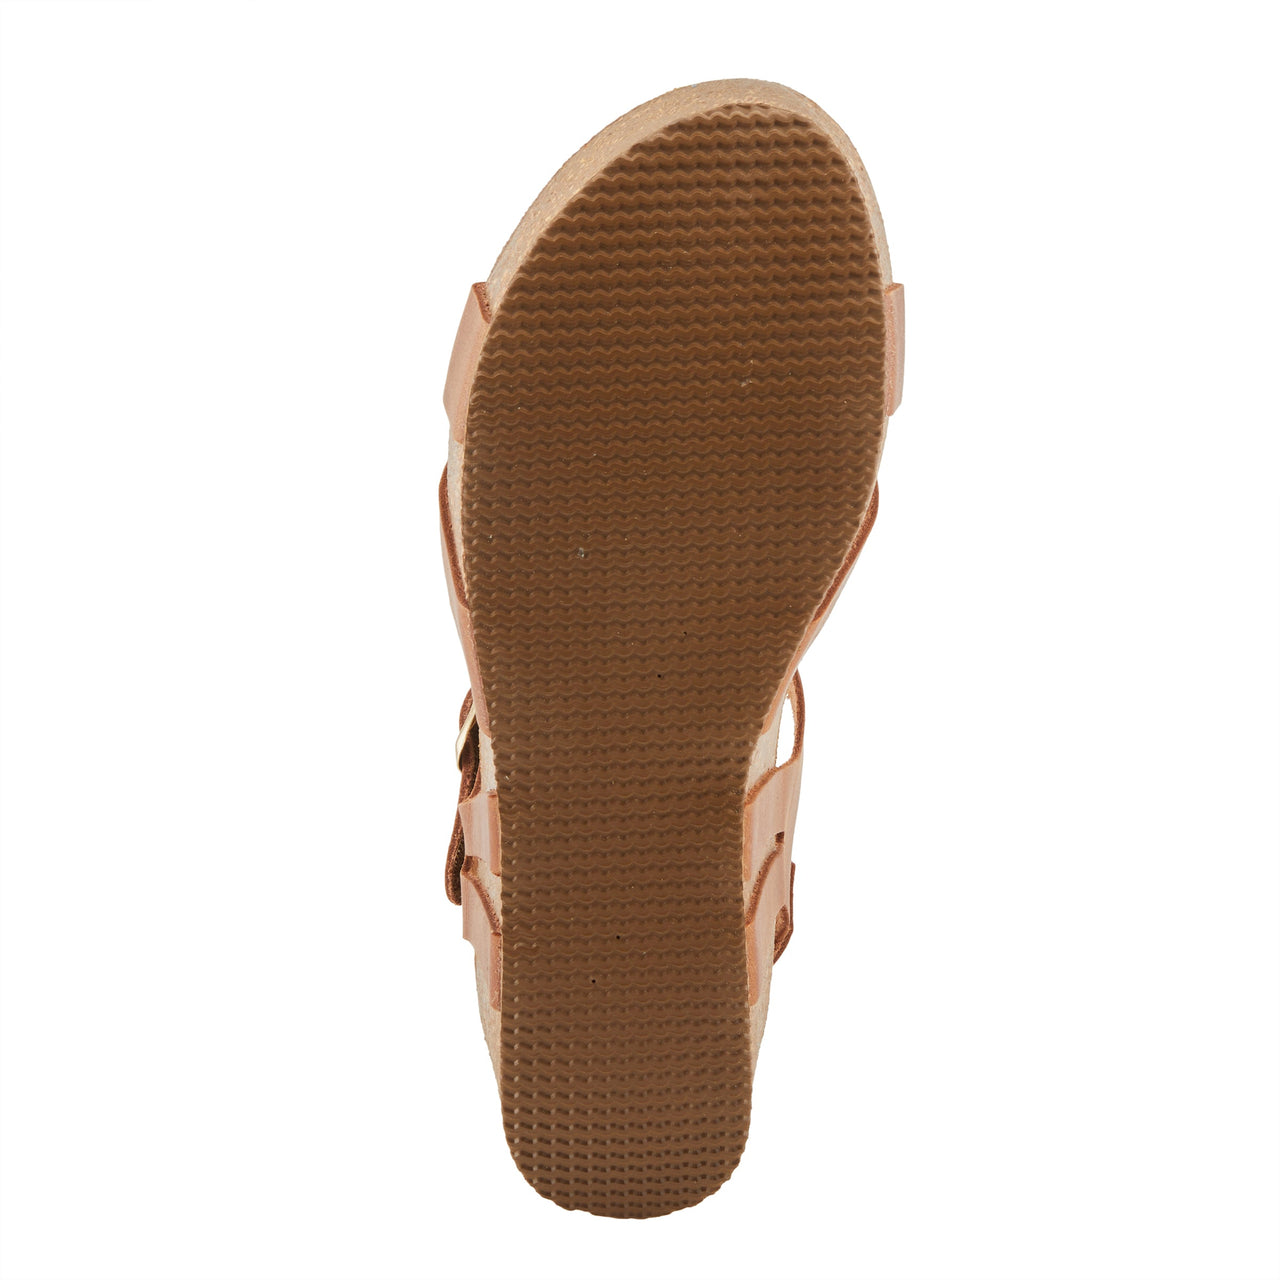 Brown leather Spring Step Burton sandals with cushioned insole and adjustable strap for comfortable all-day wear